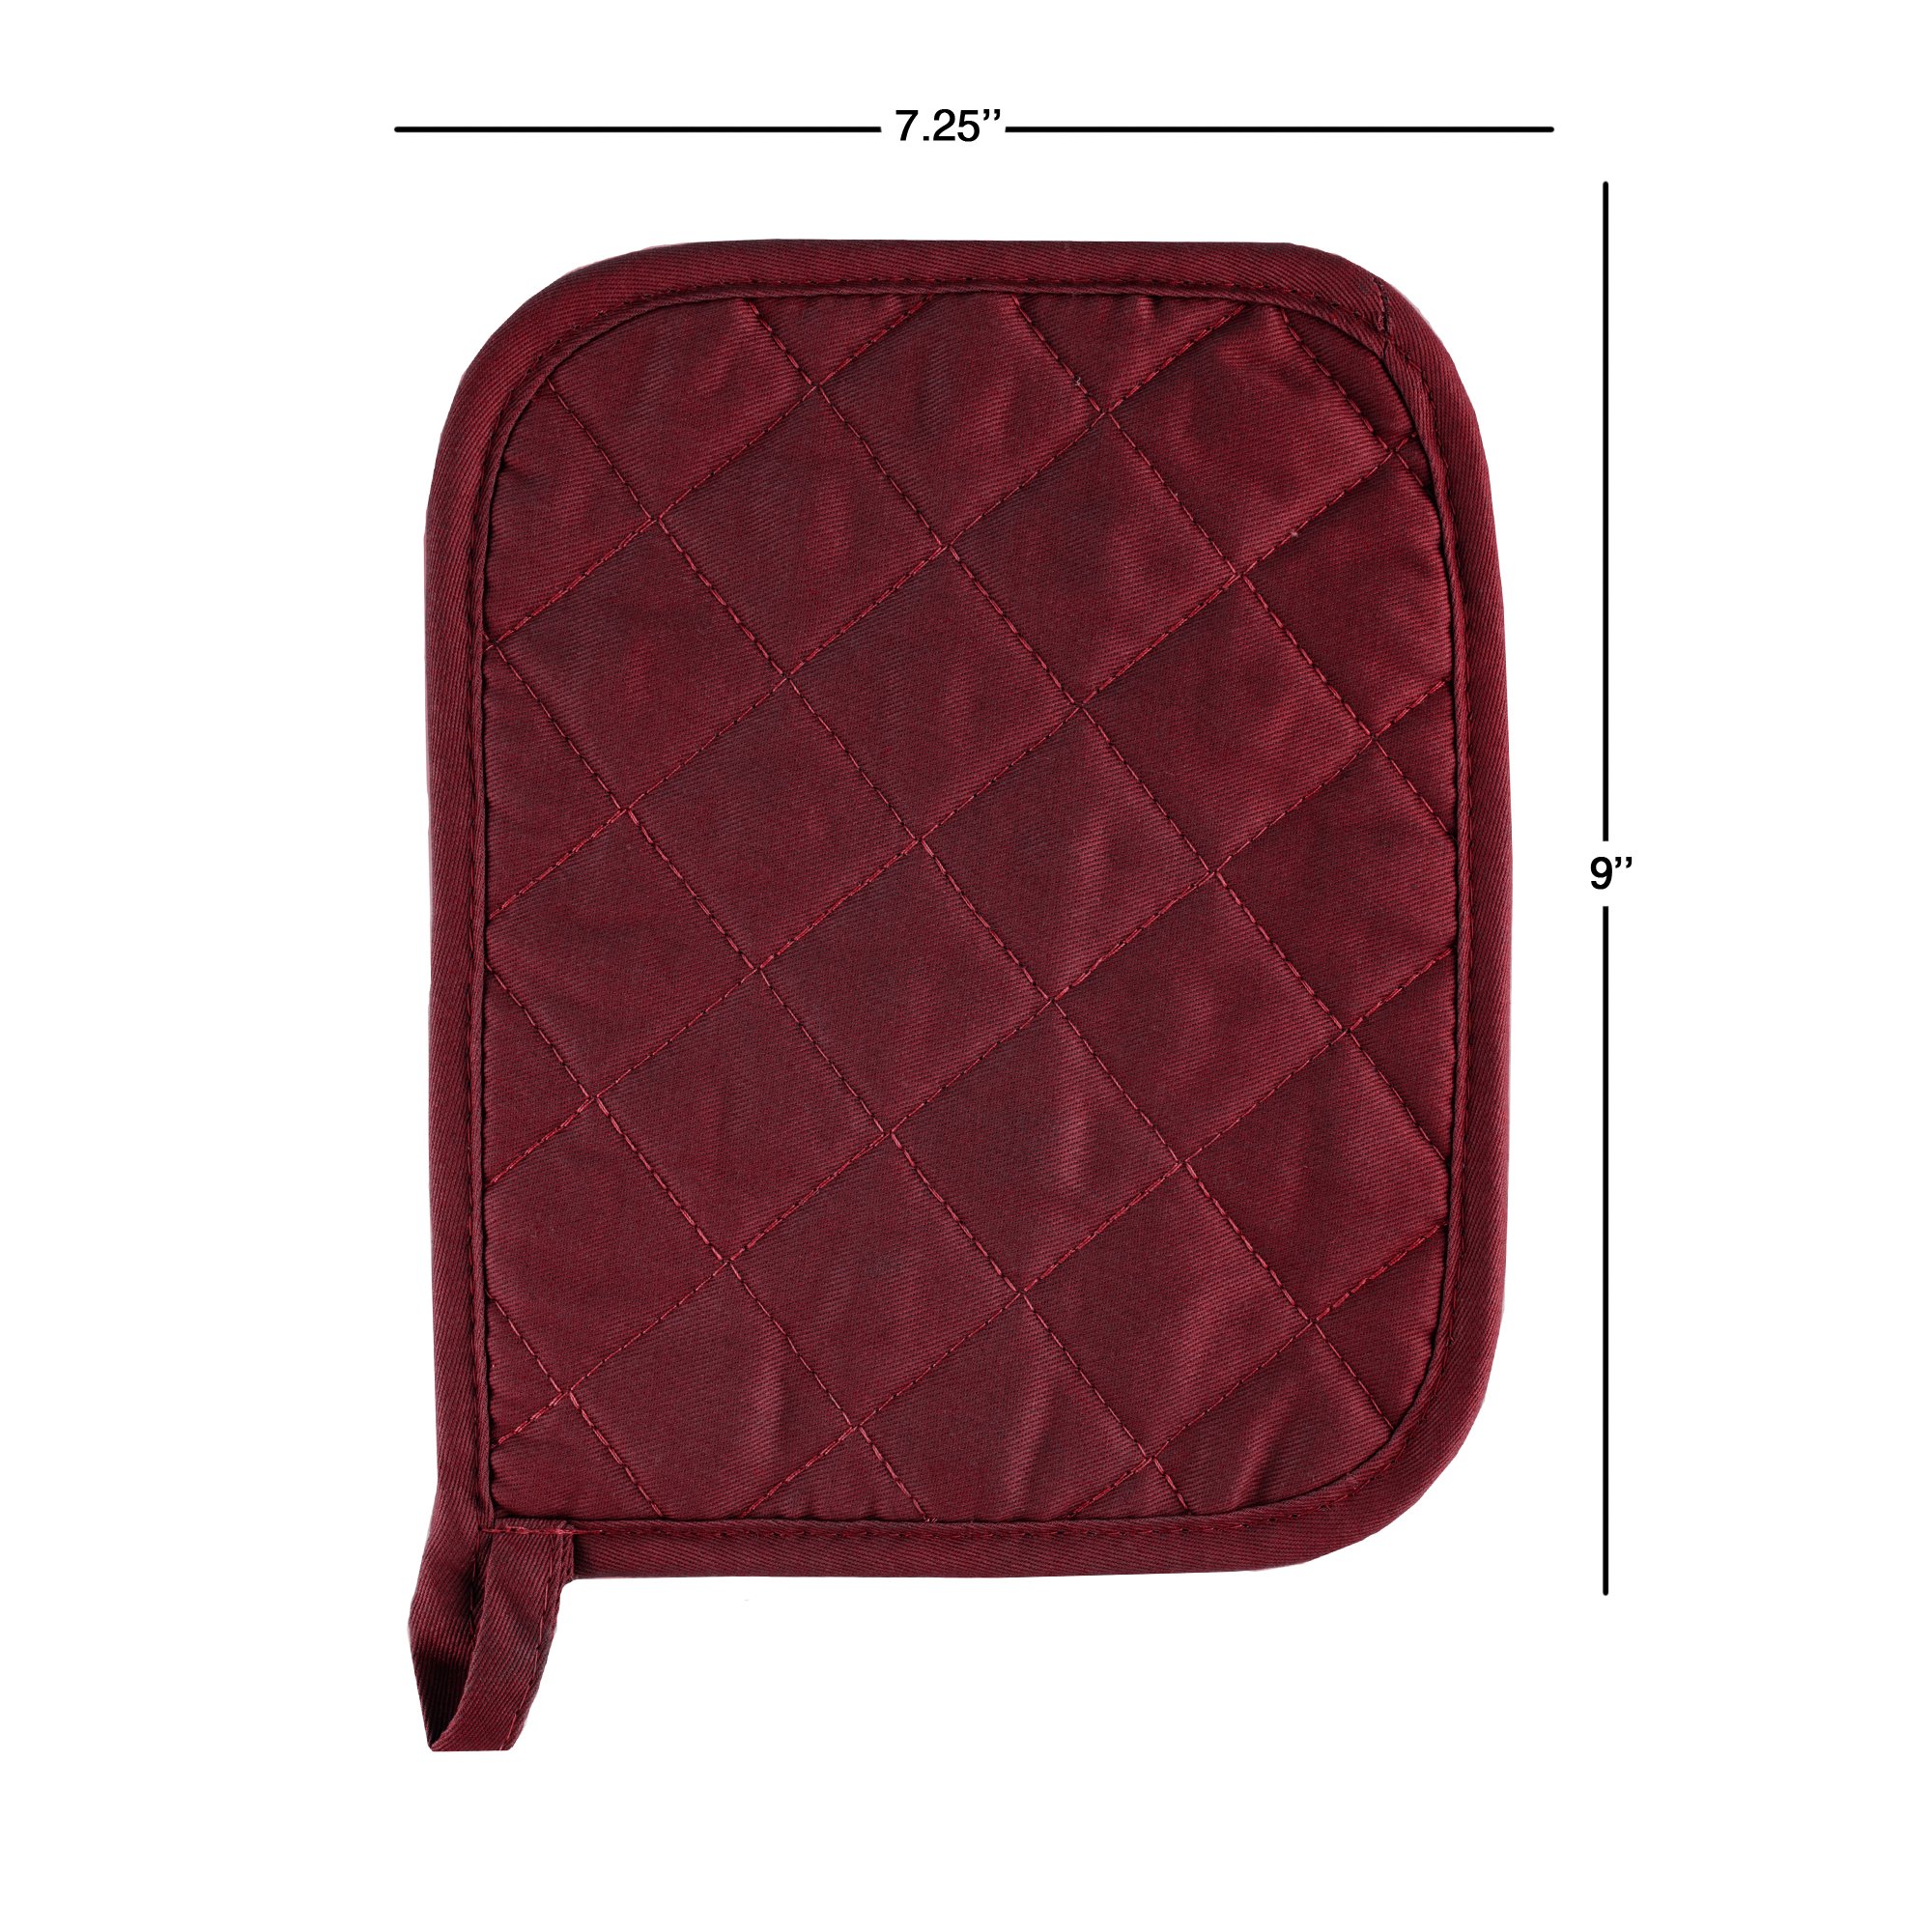 Pot Holder Set With Silicone Grip, Quilted And Heat Resistant (Set of 2) By Lavish Home (Burgundy)